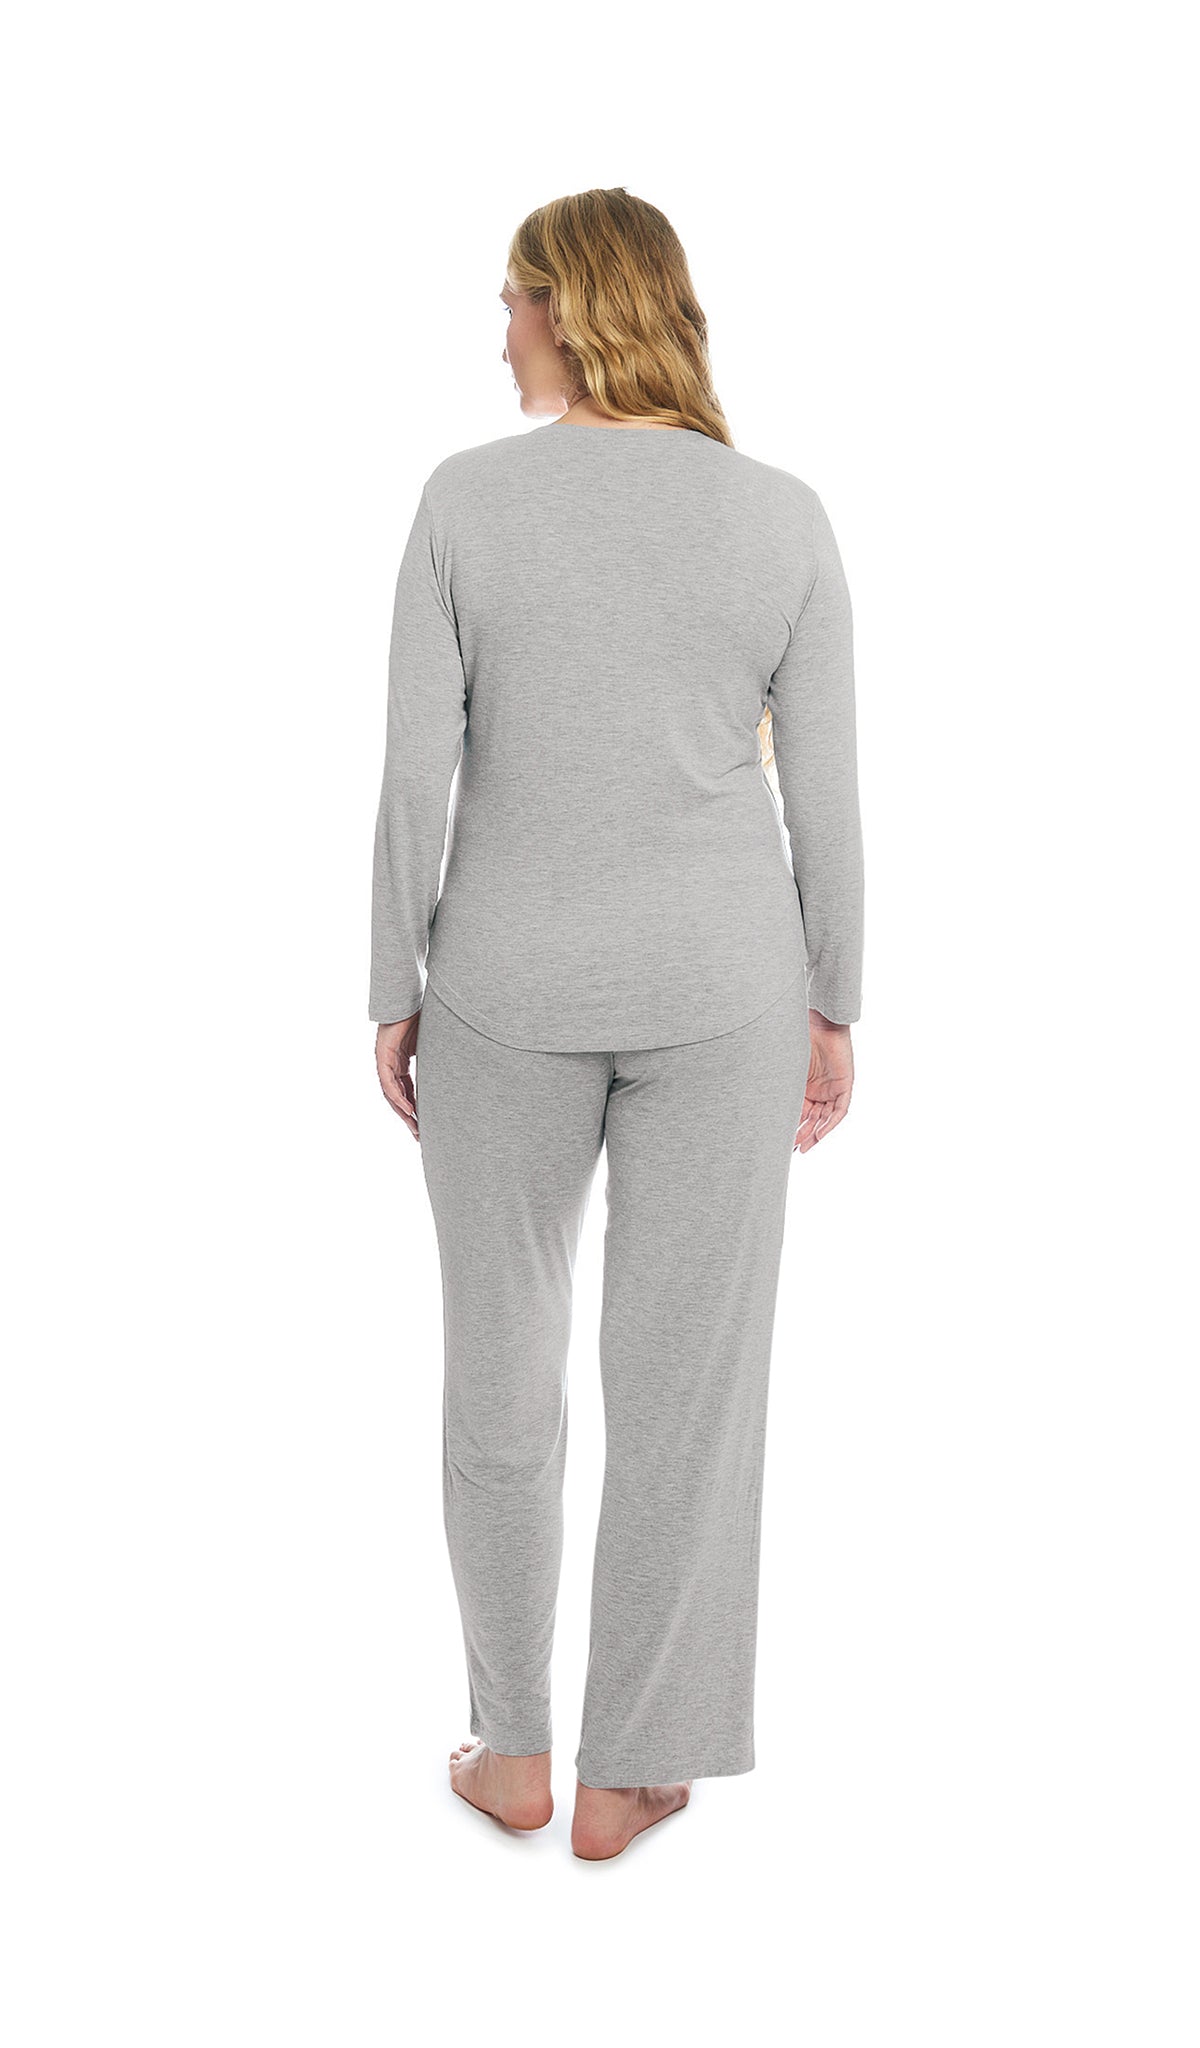 Heather Grey Solid Laina 2-Piece Set. Back shot of woman wearing long sleeve top and pant.